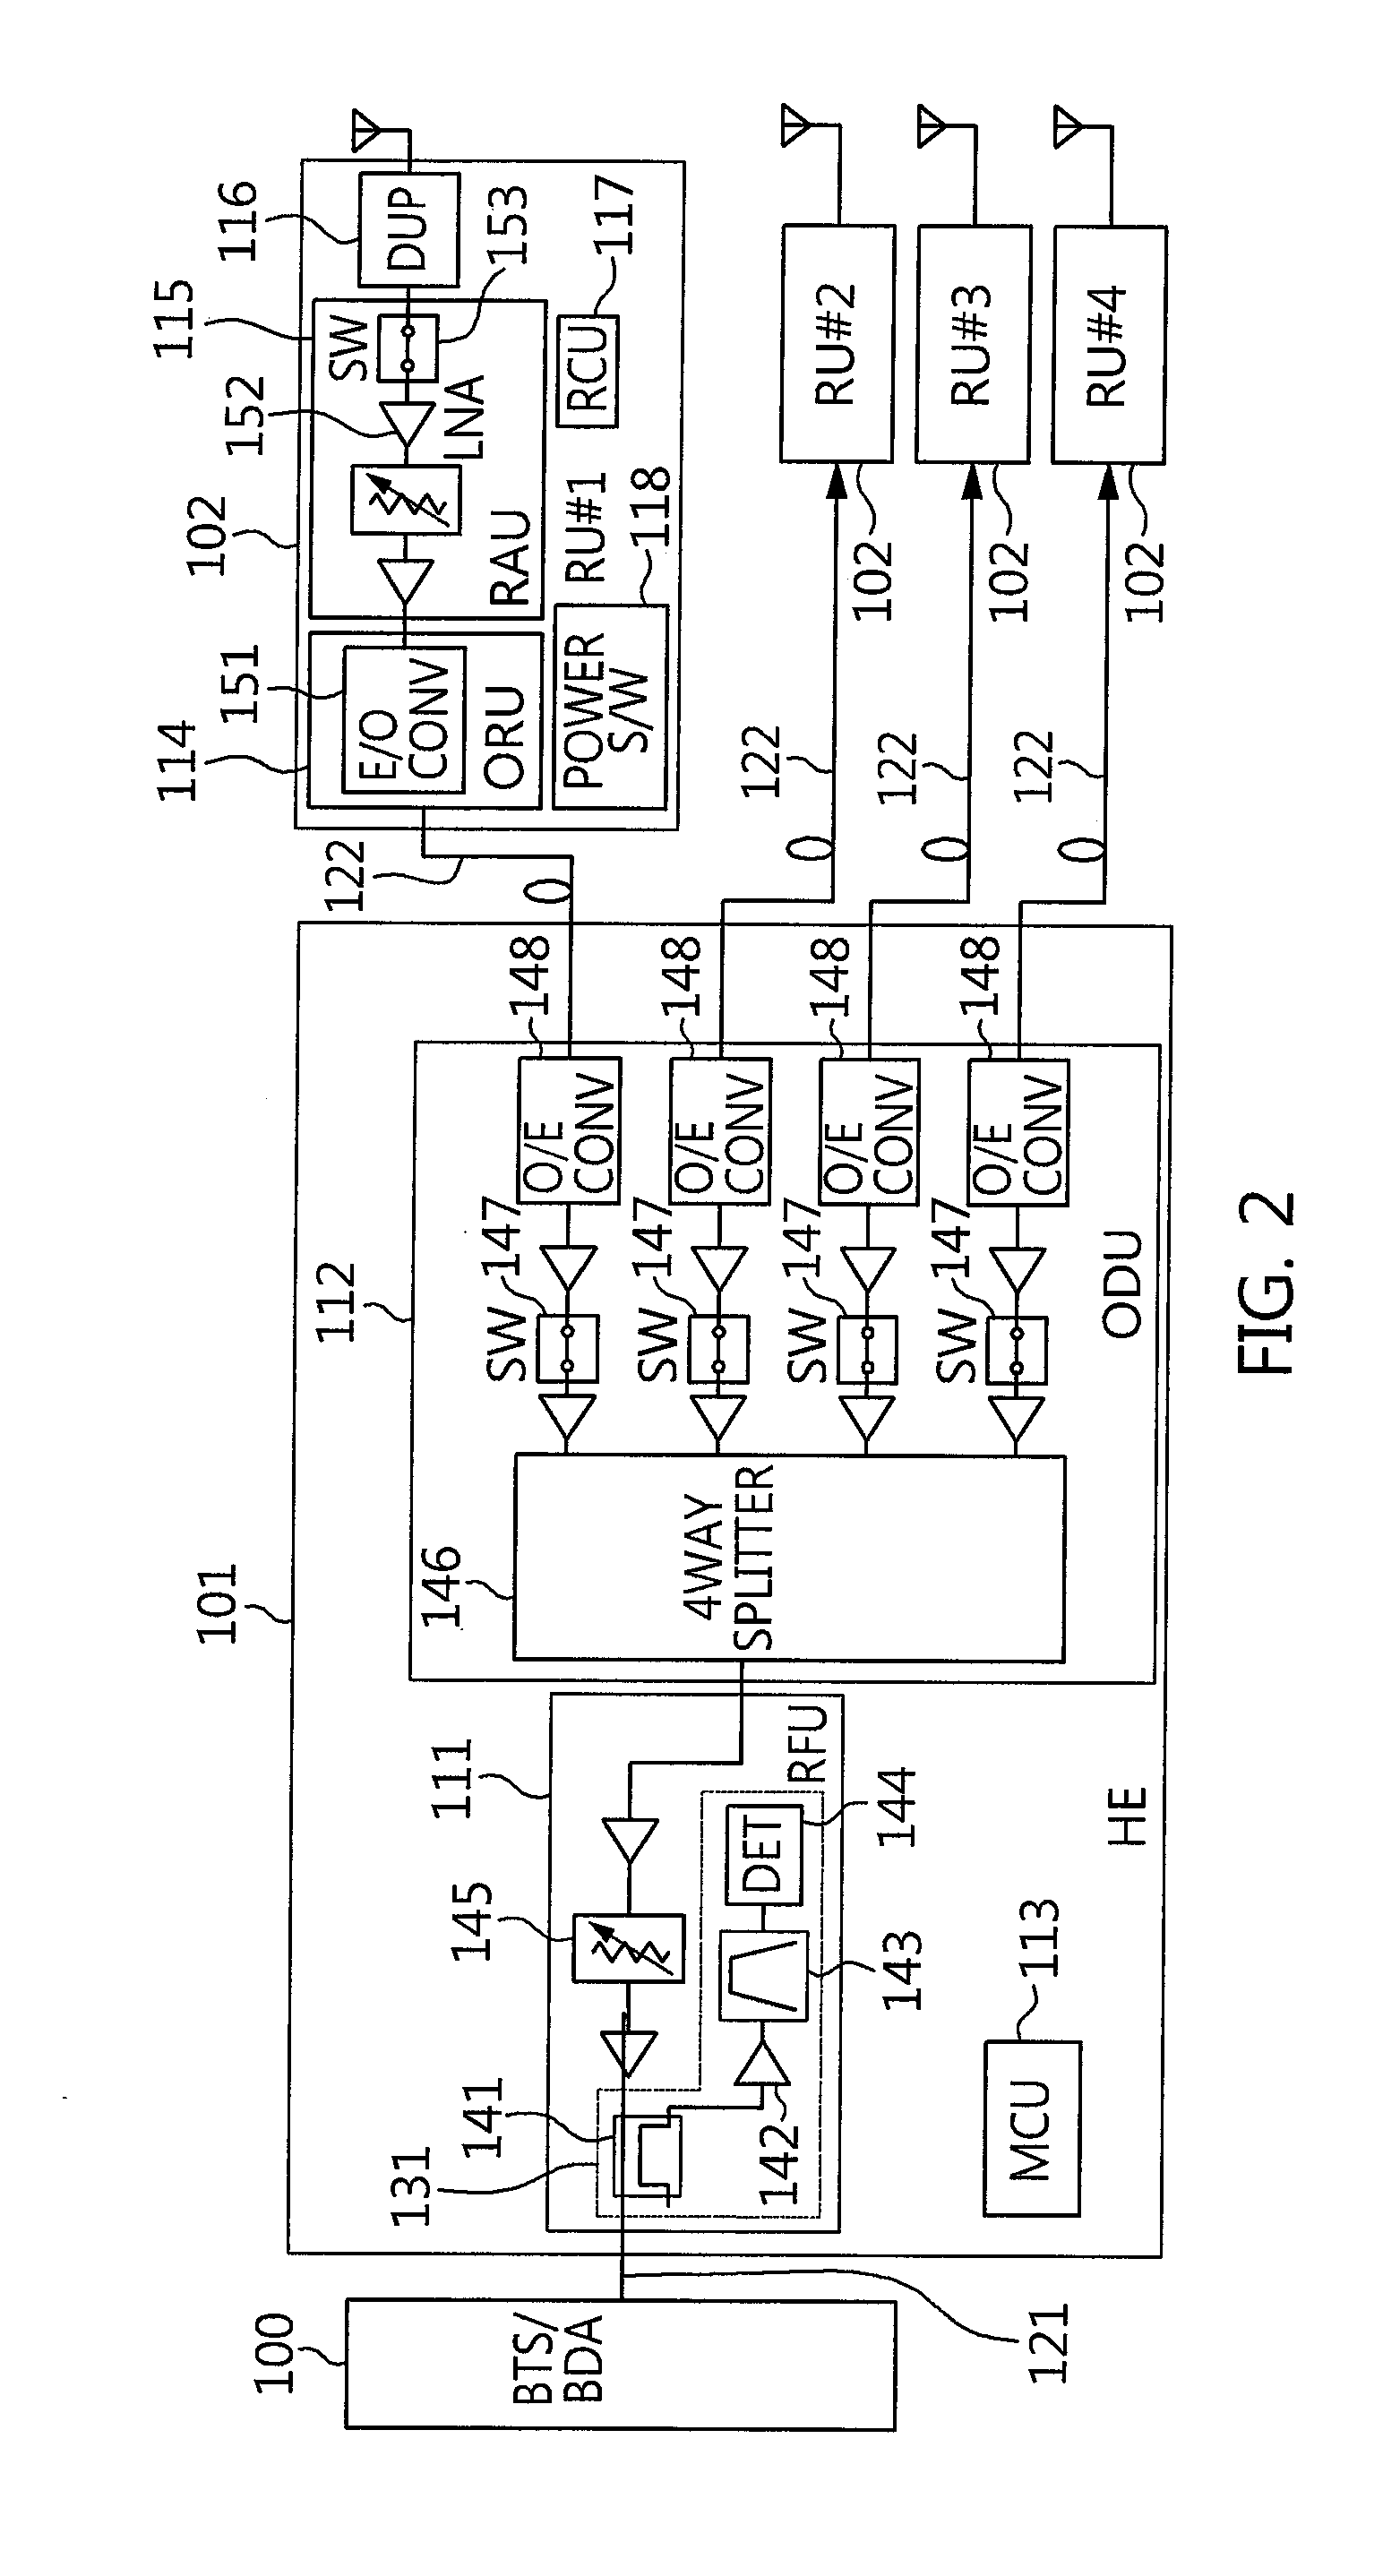 System and method for automatically measuring uplink noise level of distributed antenna system